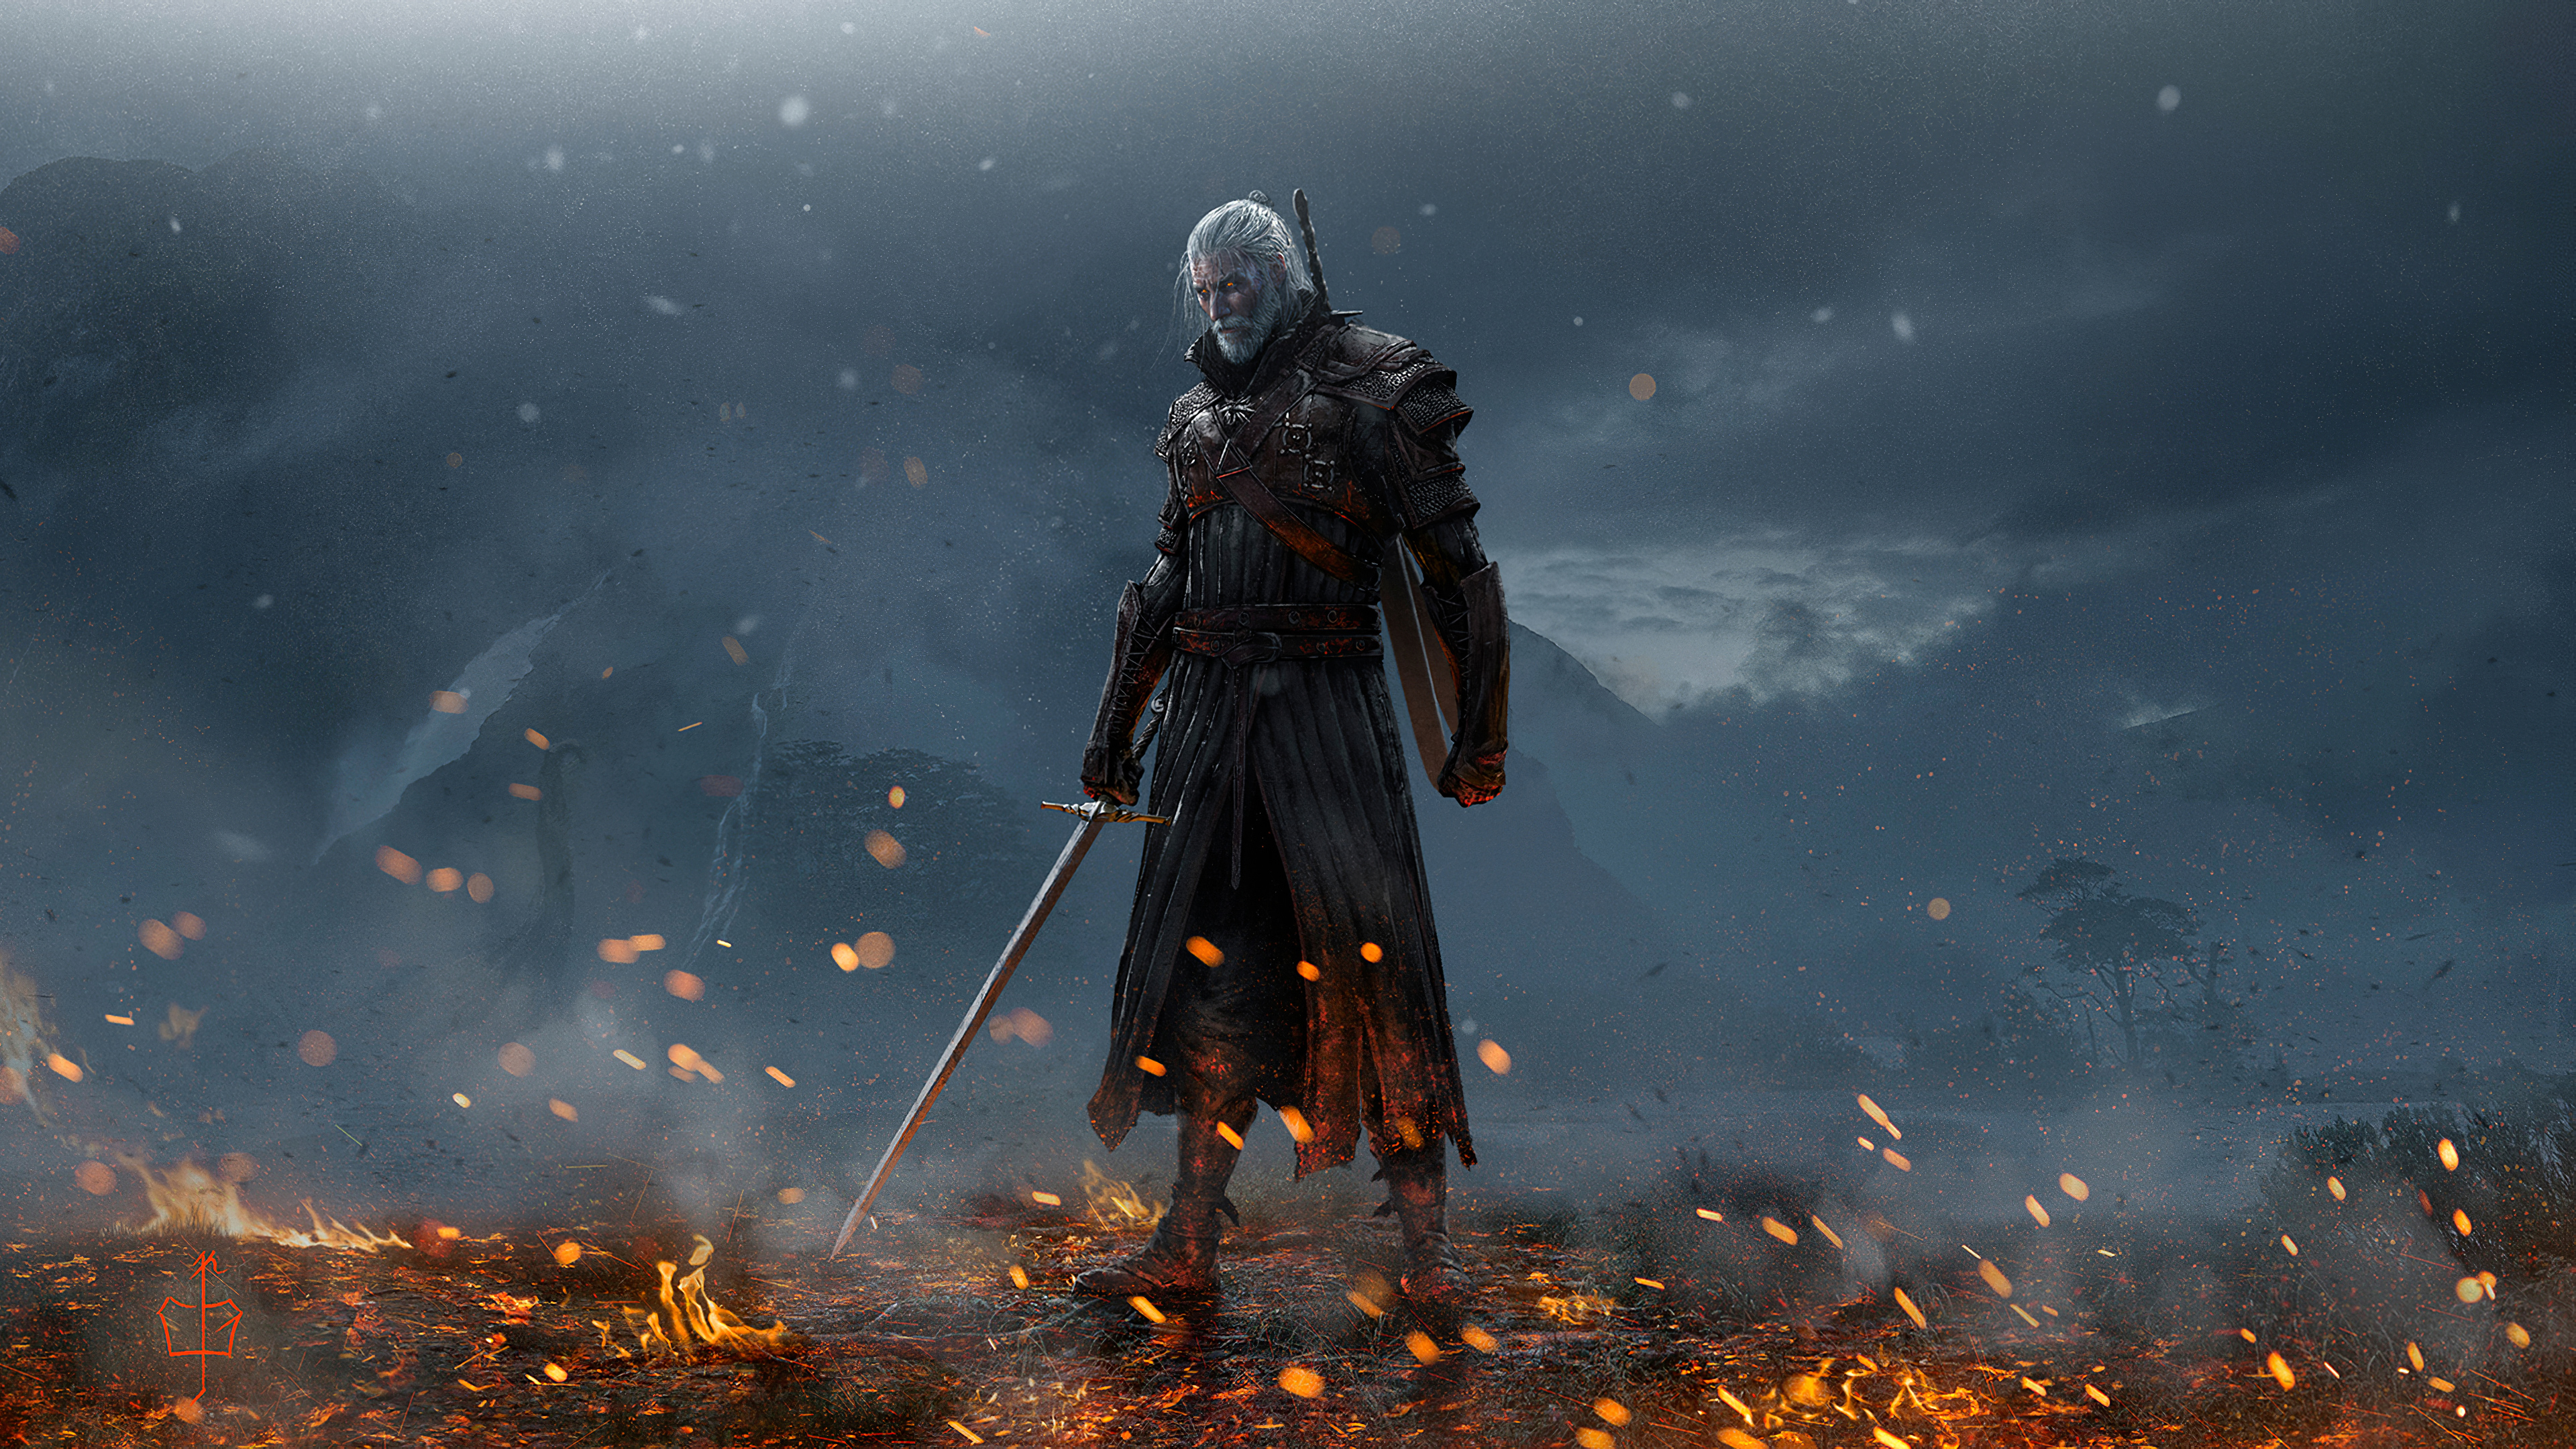 The White Wolf The Witcher The Witcher 3 Wild Hunt Video Games Video Game Characters Video Game Art  3840x2160